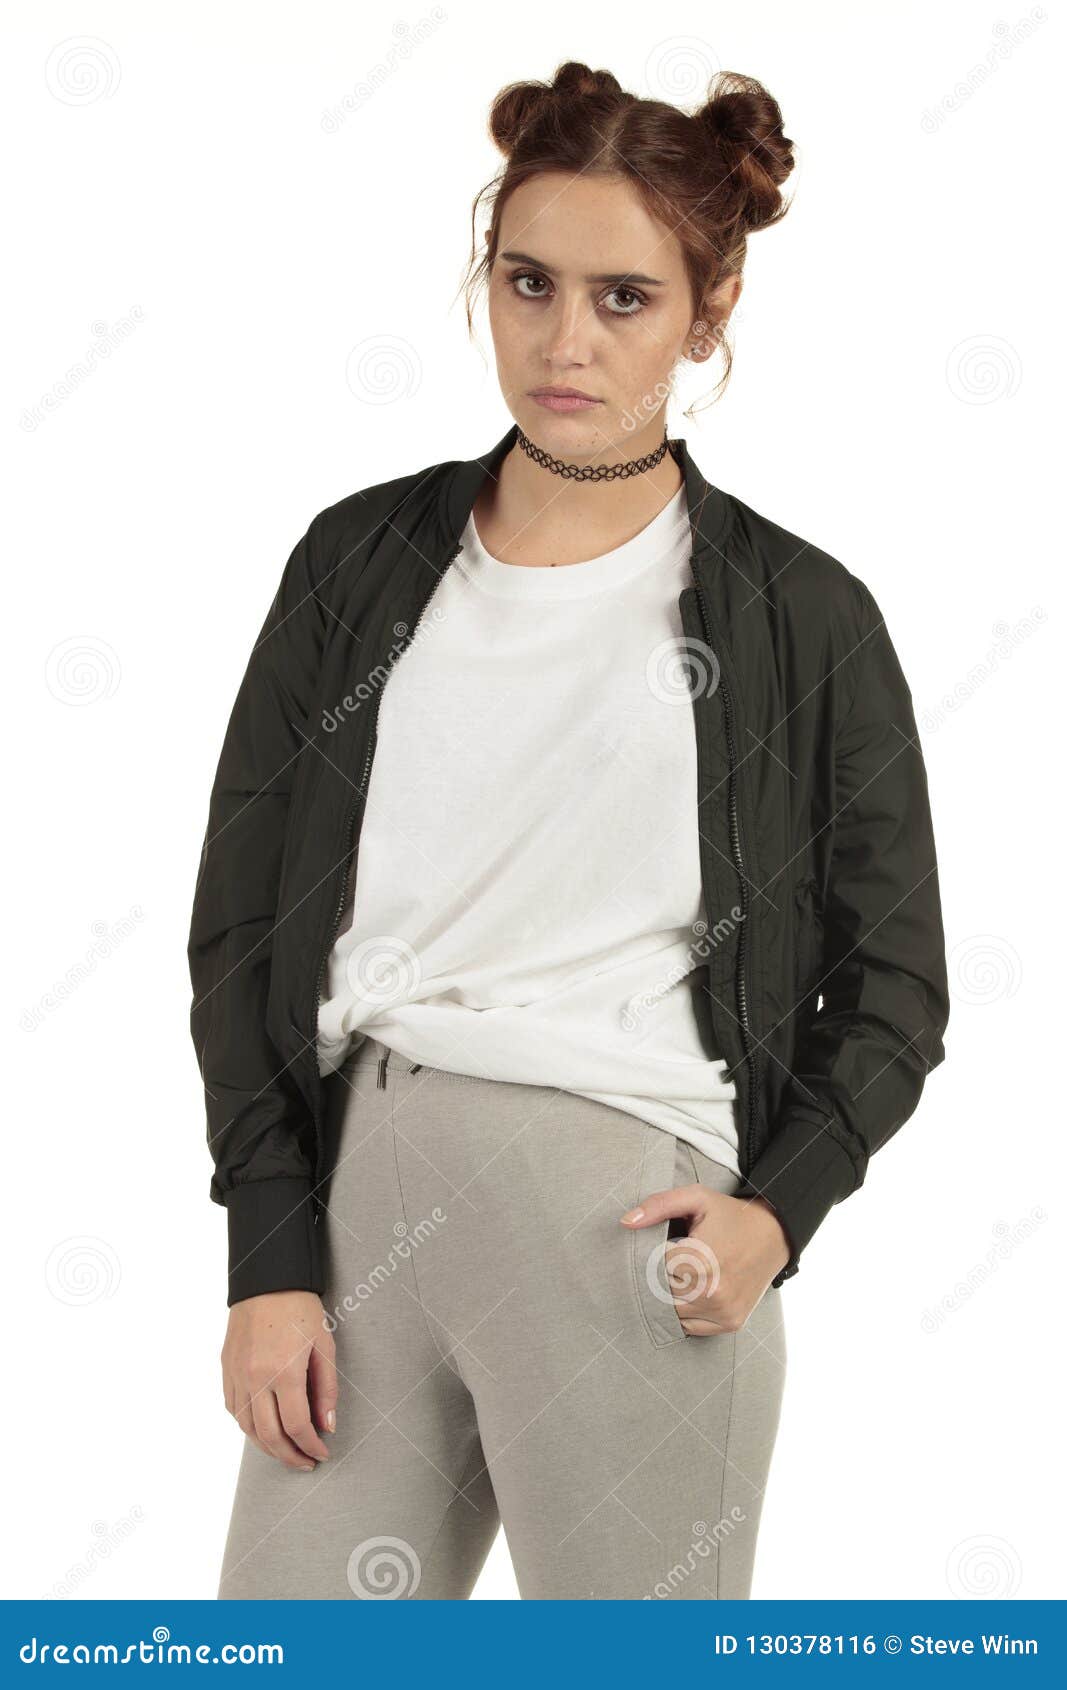 All the Attitude, Get this Look in Your Shop with this Girl T-shirt Model  Stock Photo - Image of girl, oversized: 130378116